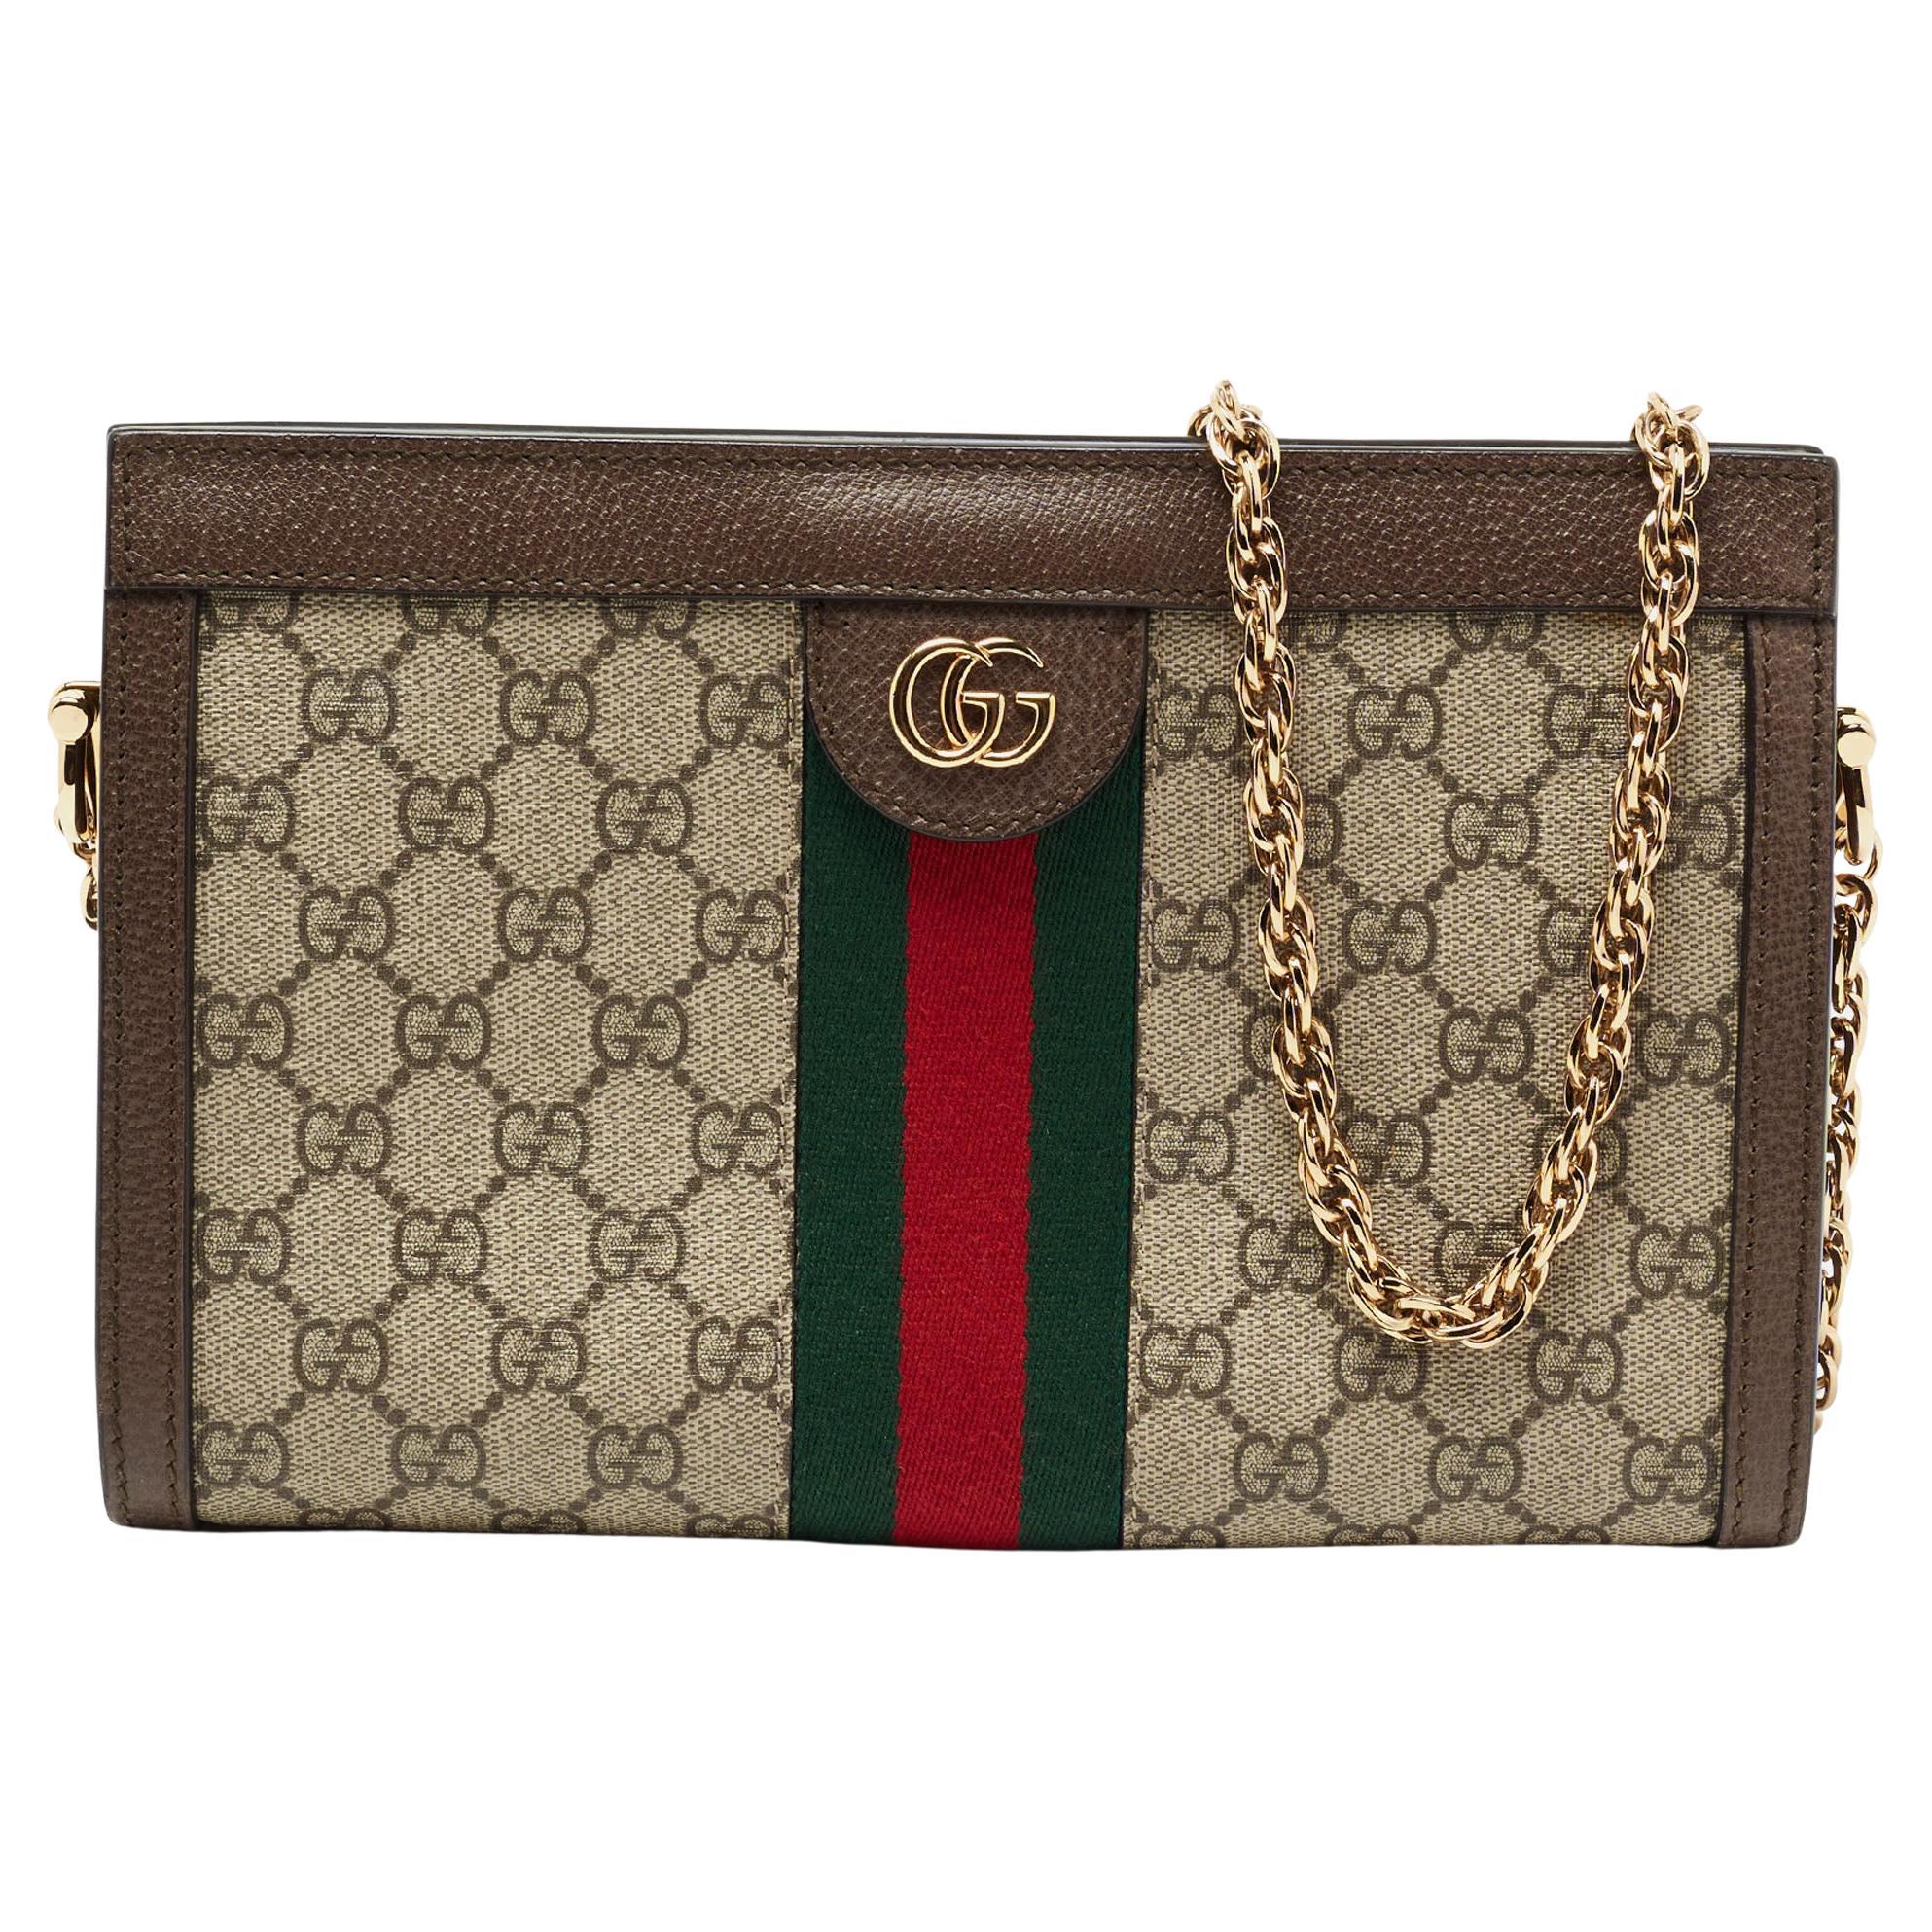 Gucci Beige/Ebony GG Supreme Canvas and Leather Small Ophidia Shoulder Bag